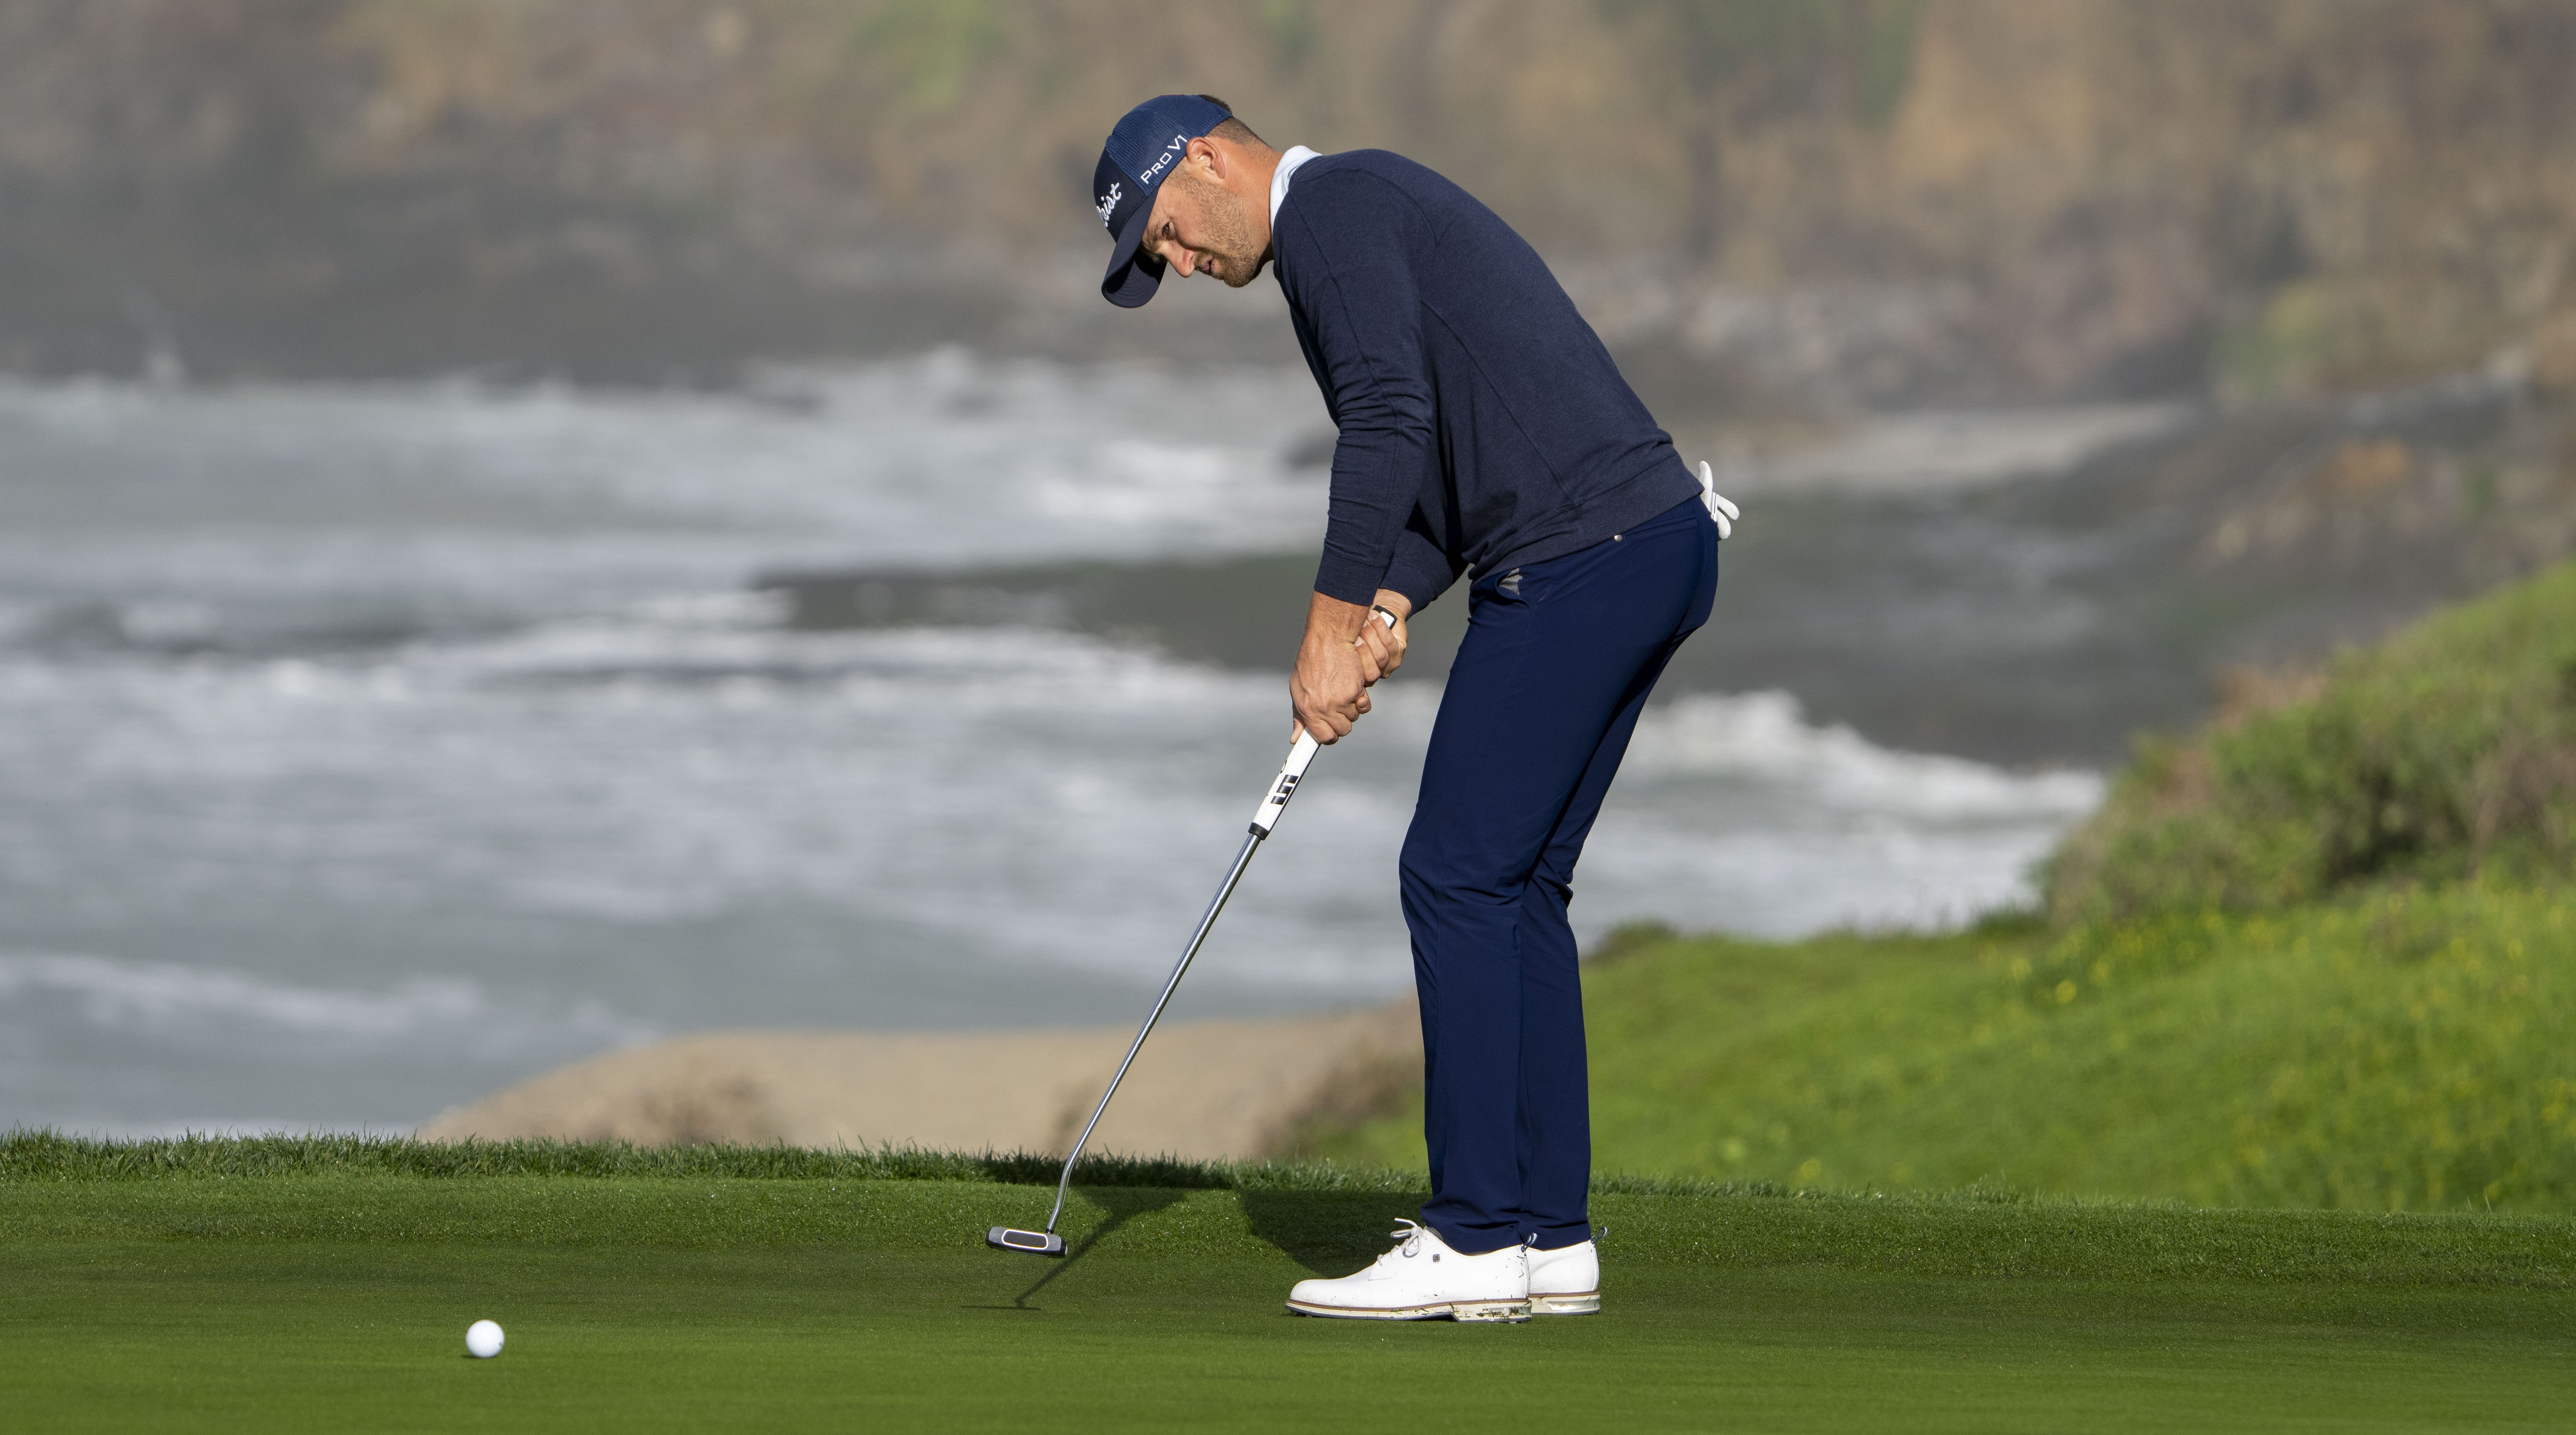 Wyndham Clark putts on the 10th hole during the second round of the AT&T Pebble Beach Pro-Am golf tournament